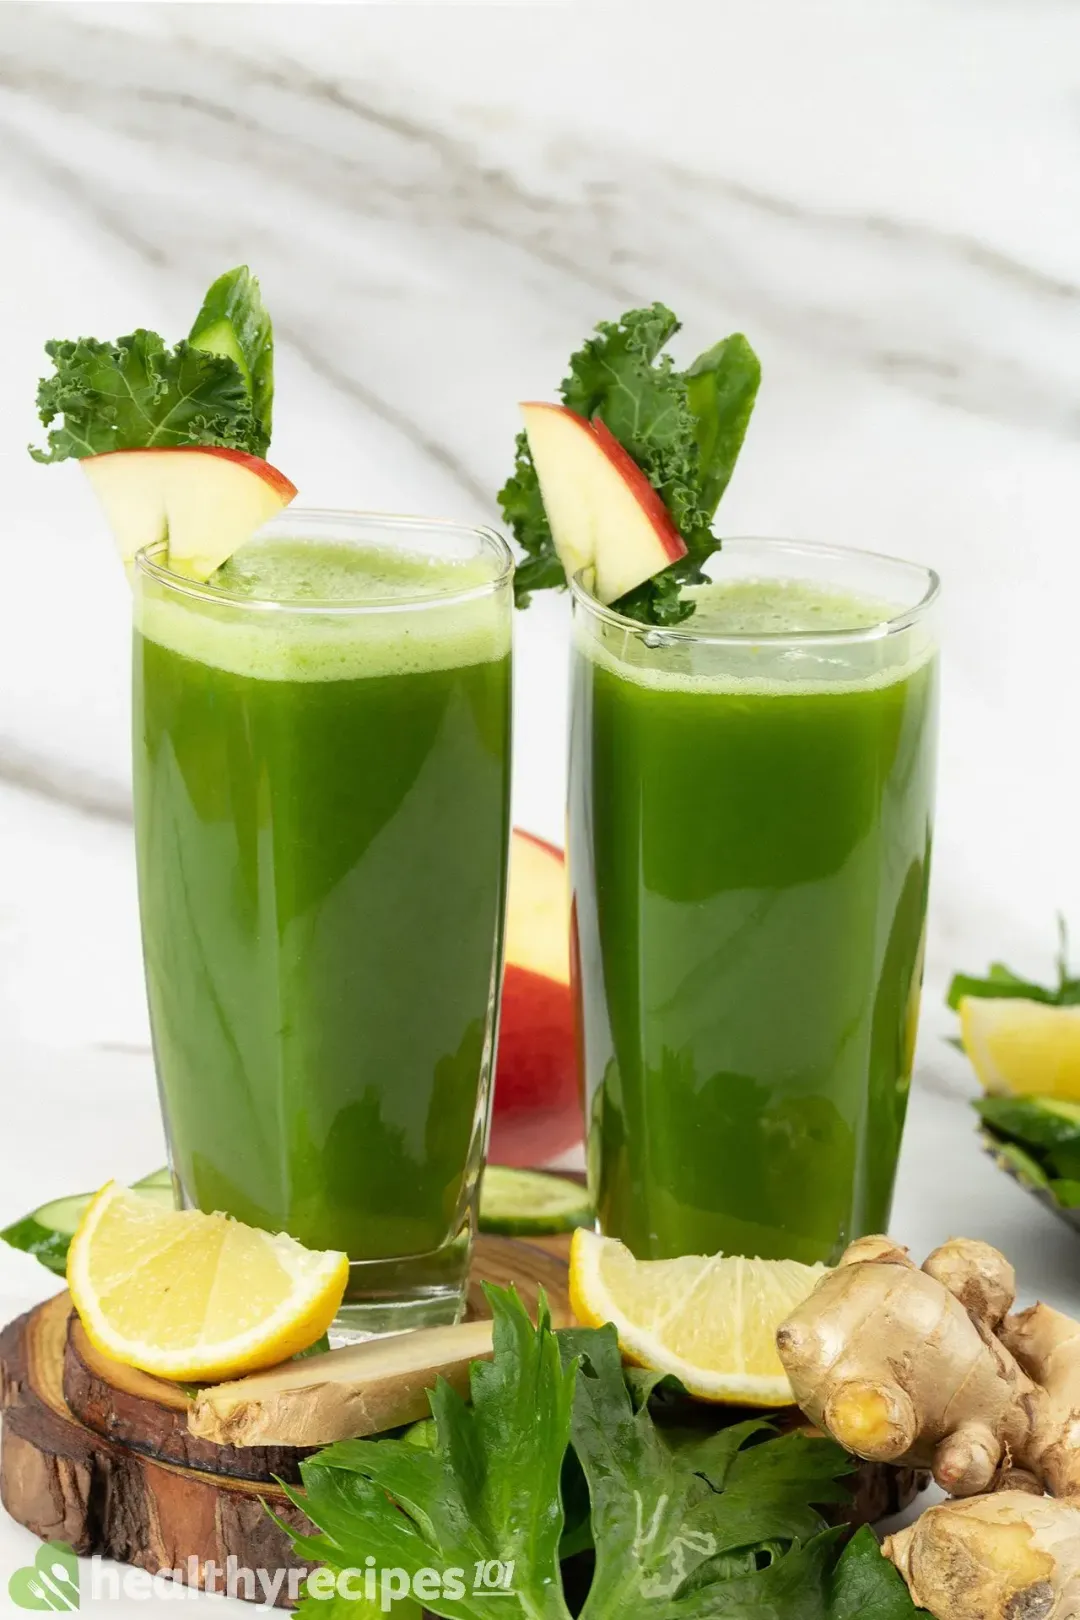 Two glasses of mean green juice put side by side, surrounded by lime wedges, green leaves, and ginger knobs